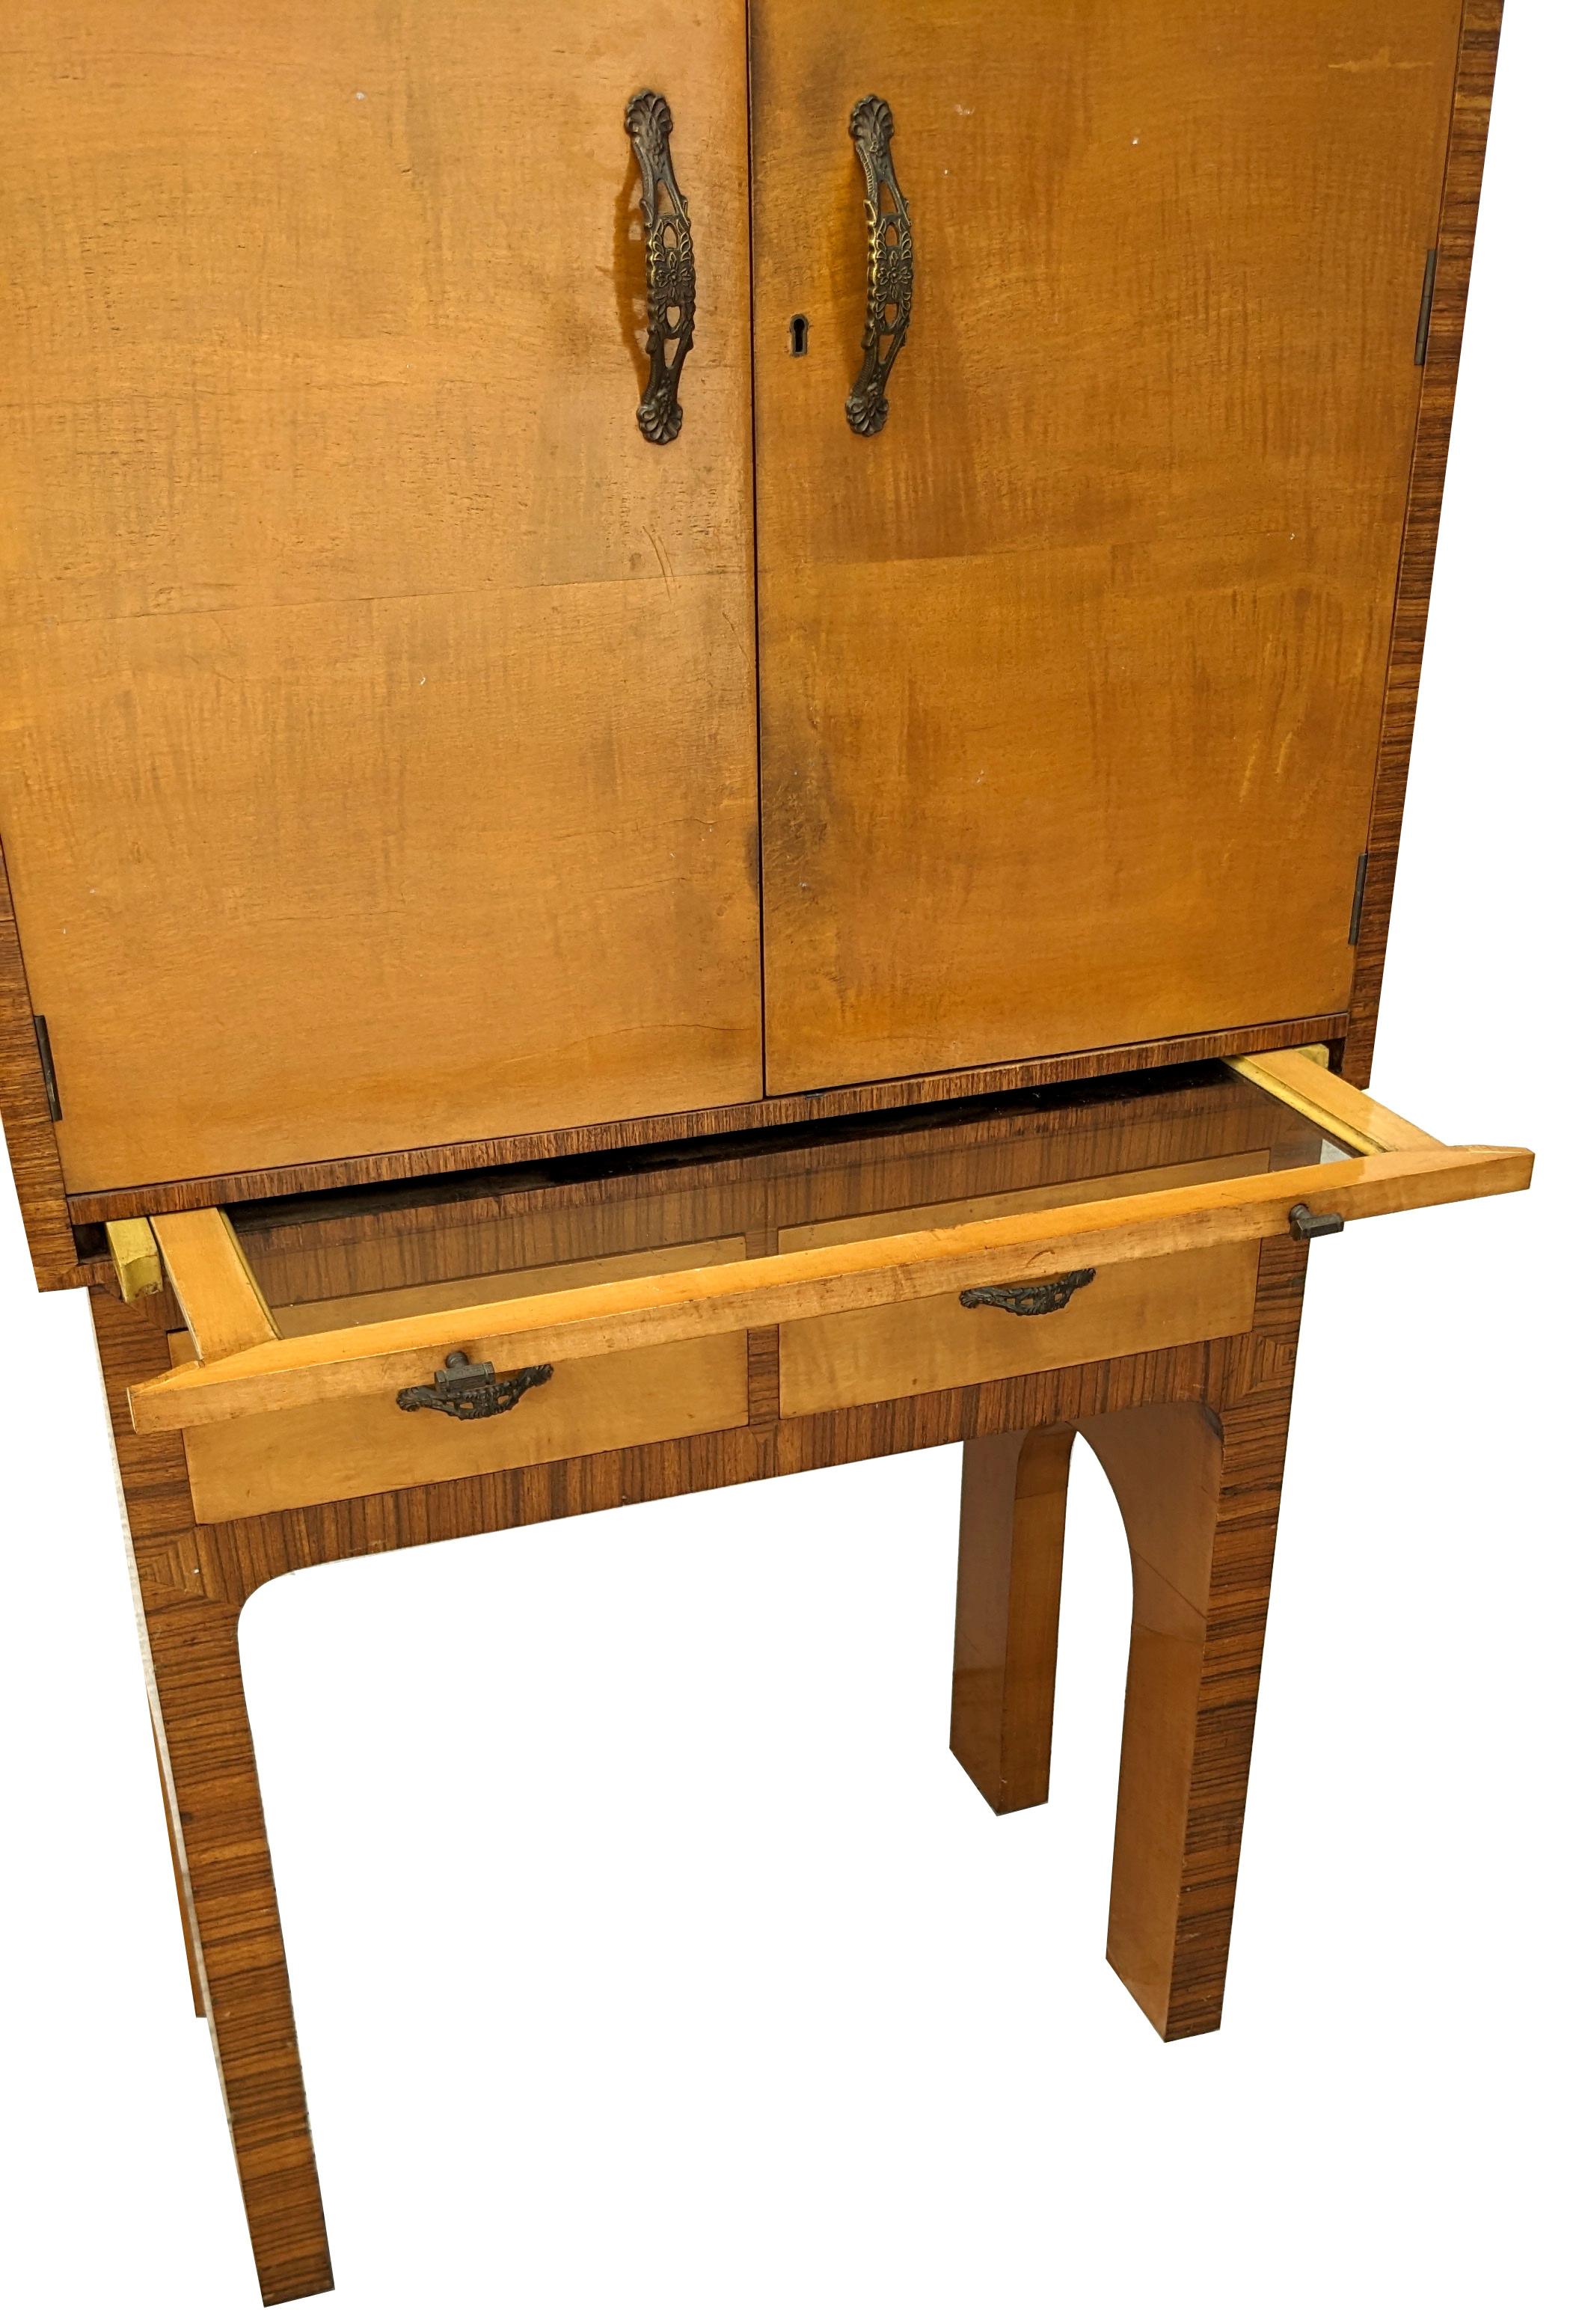 Brass Art Deco Satinwood High End Cocktail Cabinet By Epstein Brothers, c1930 For Sale